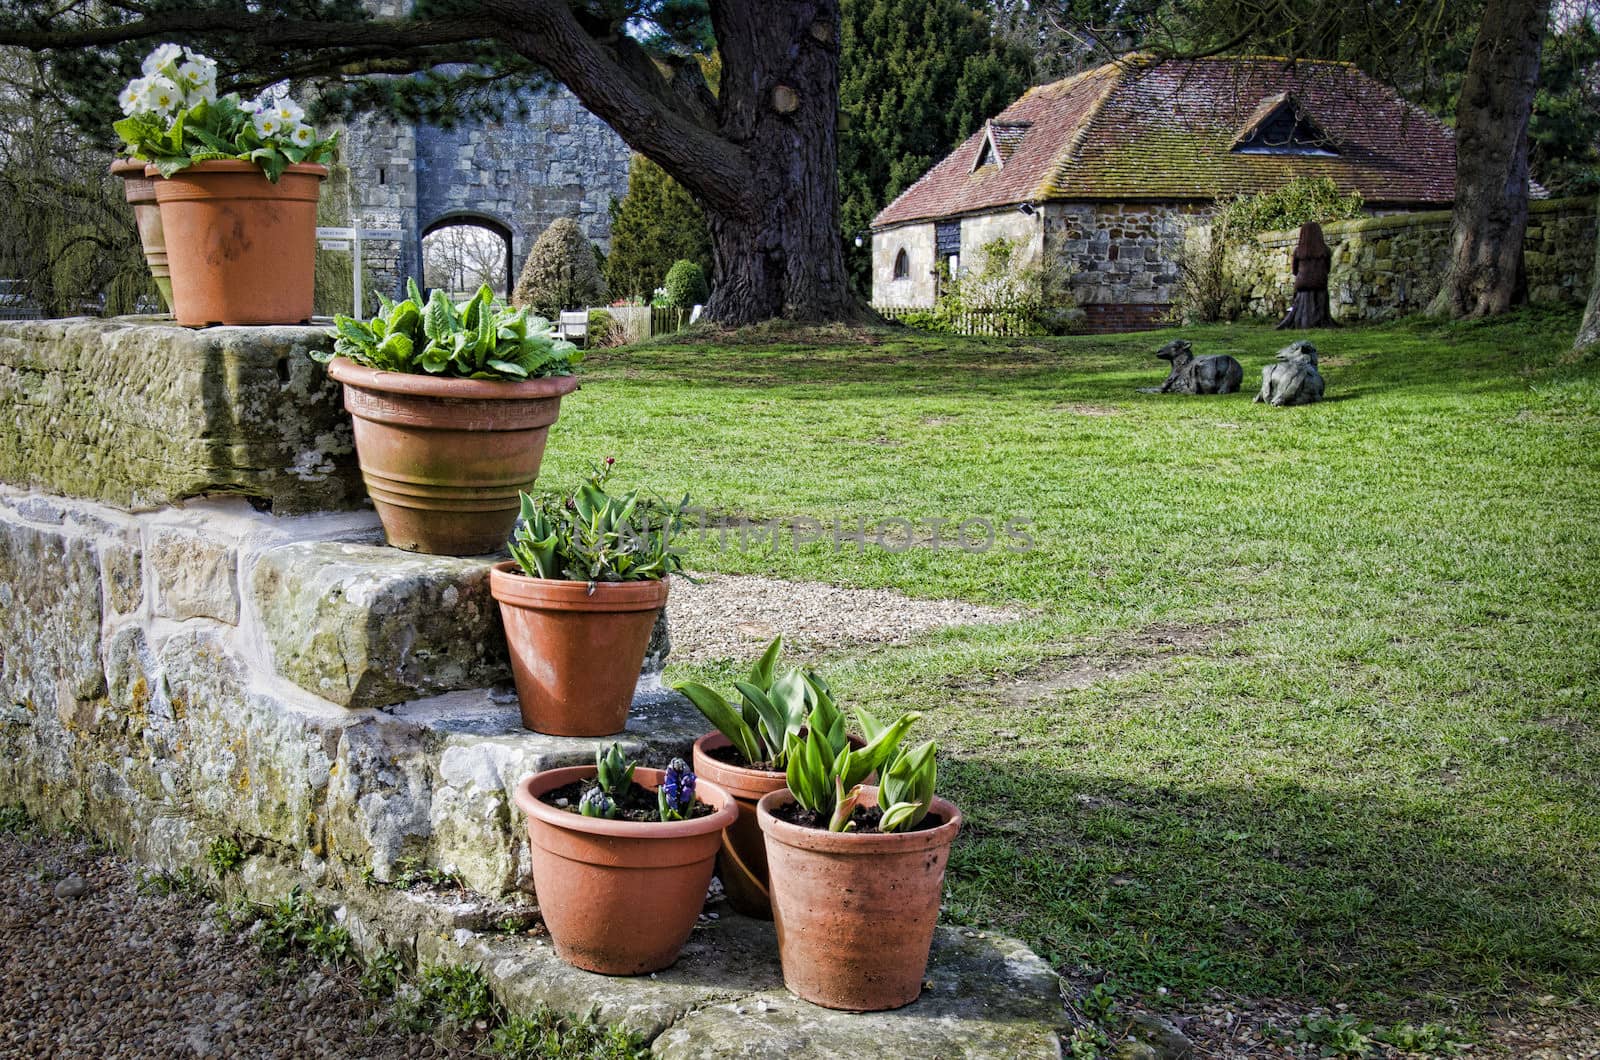 Pots at Priory by smartin69